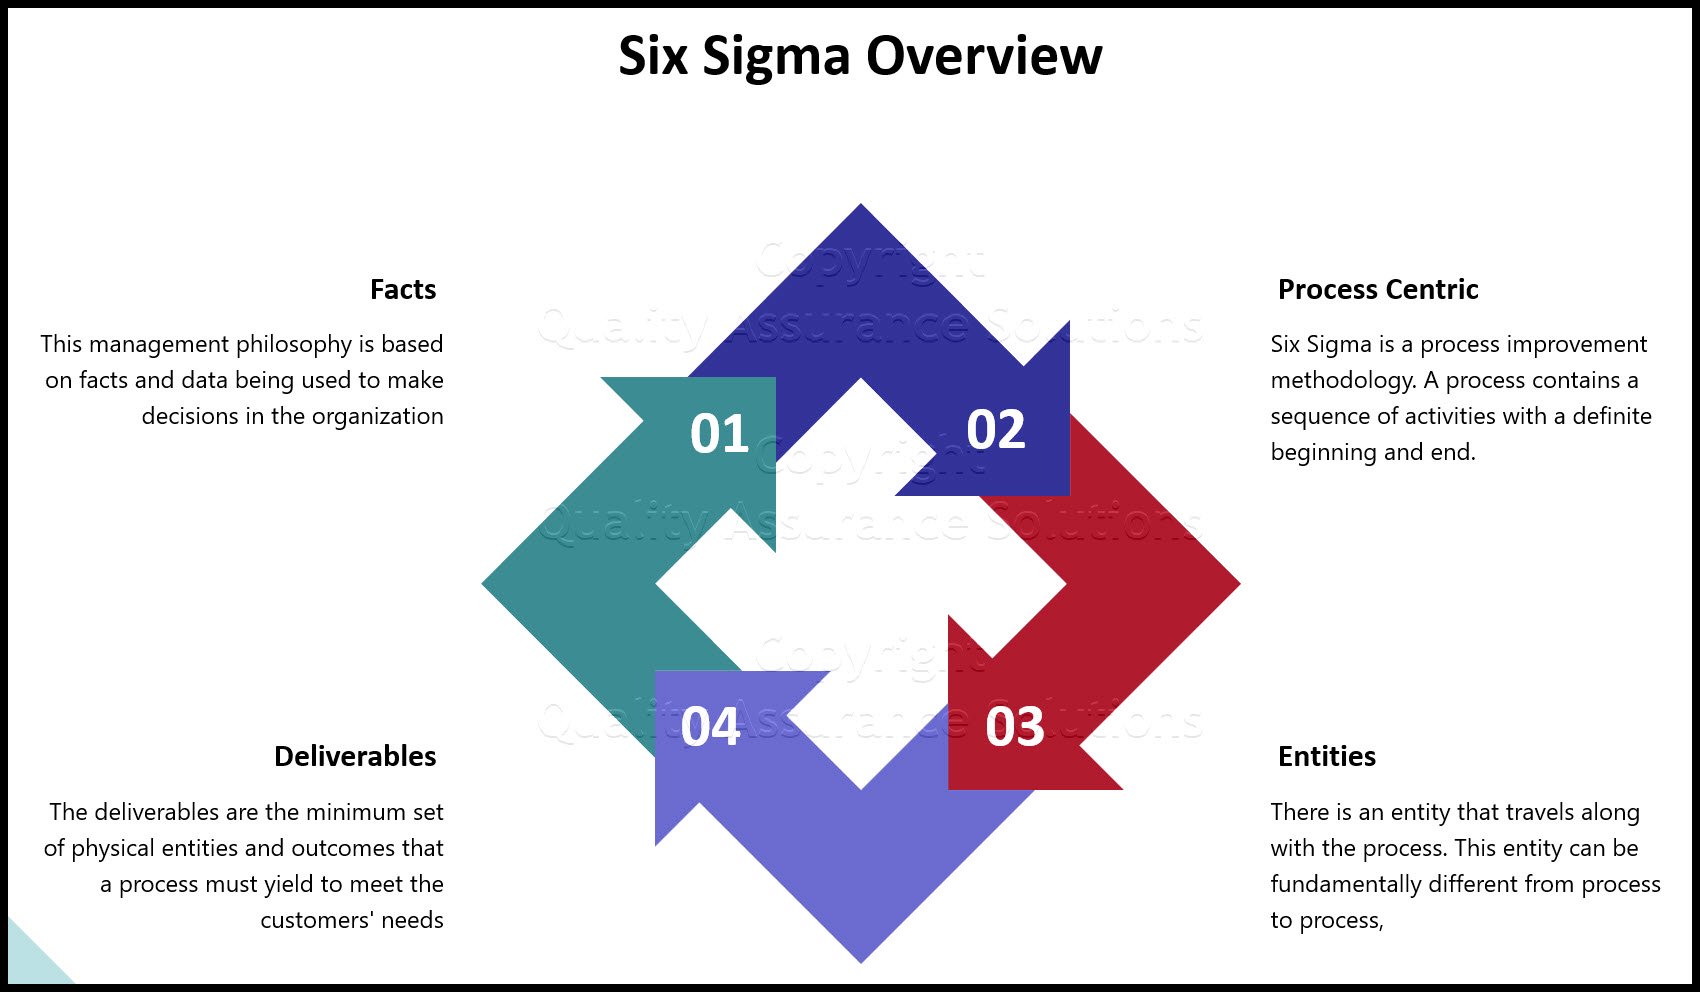 Six Sigma Overview: Six Sigma has been a popular management philosophy for years